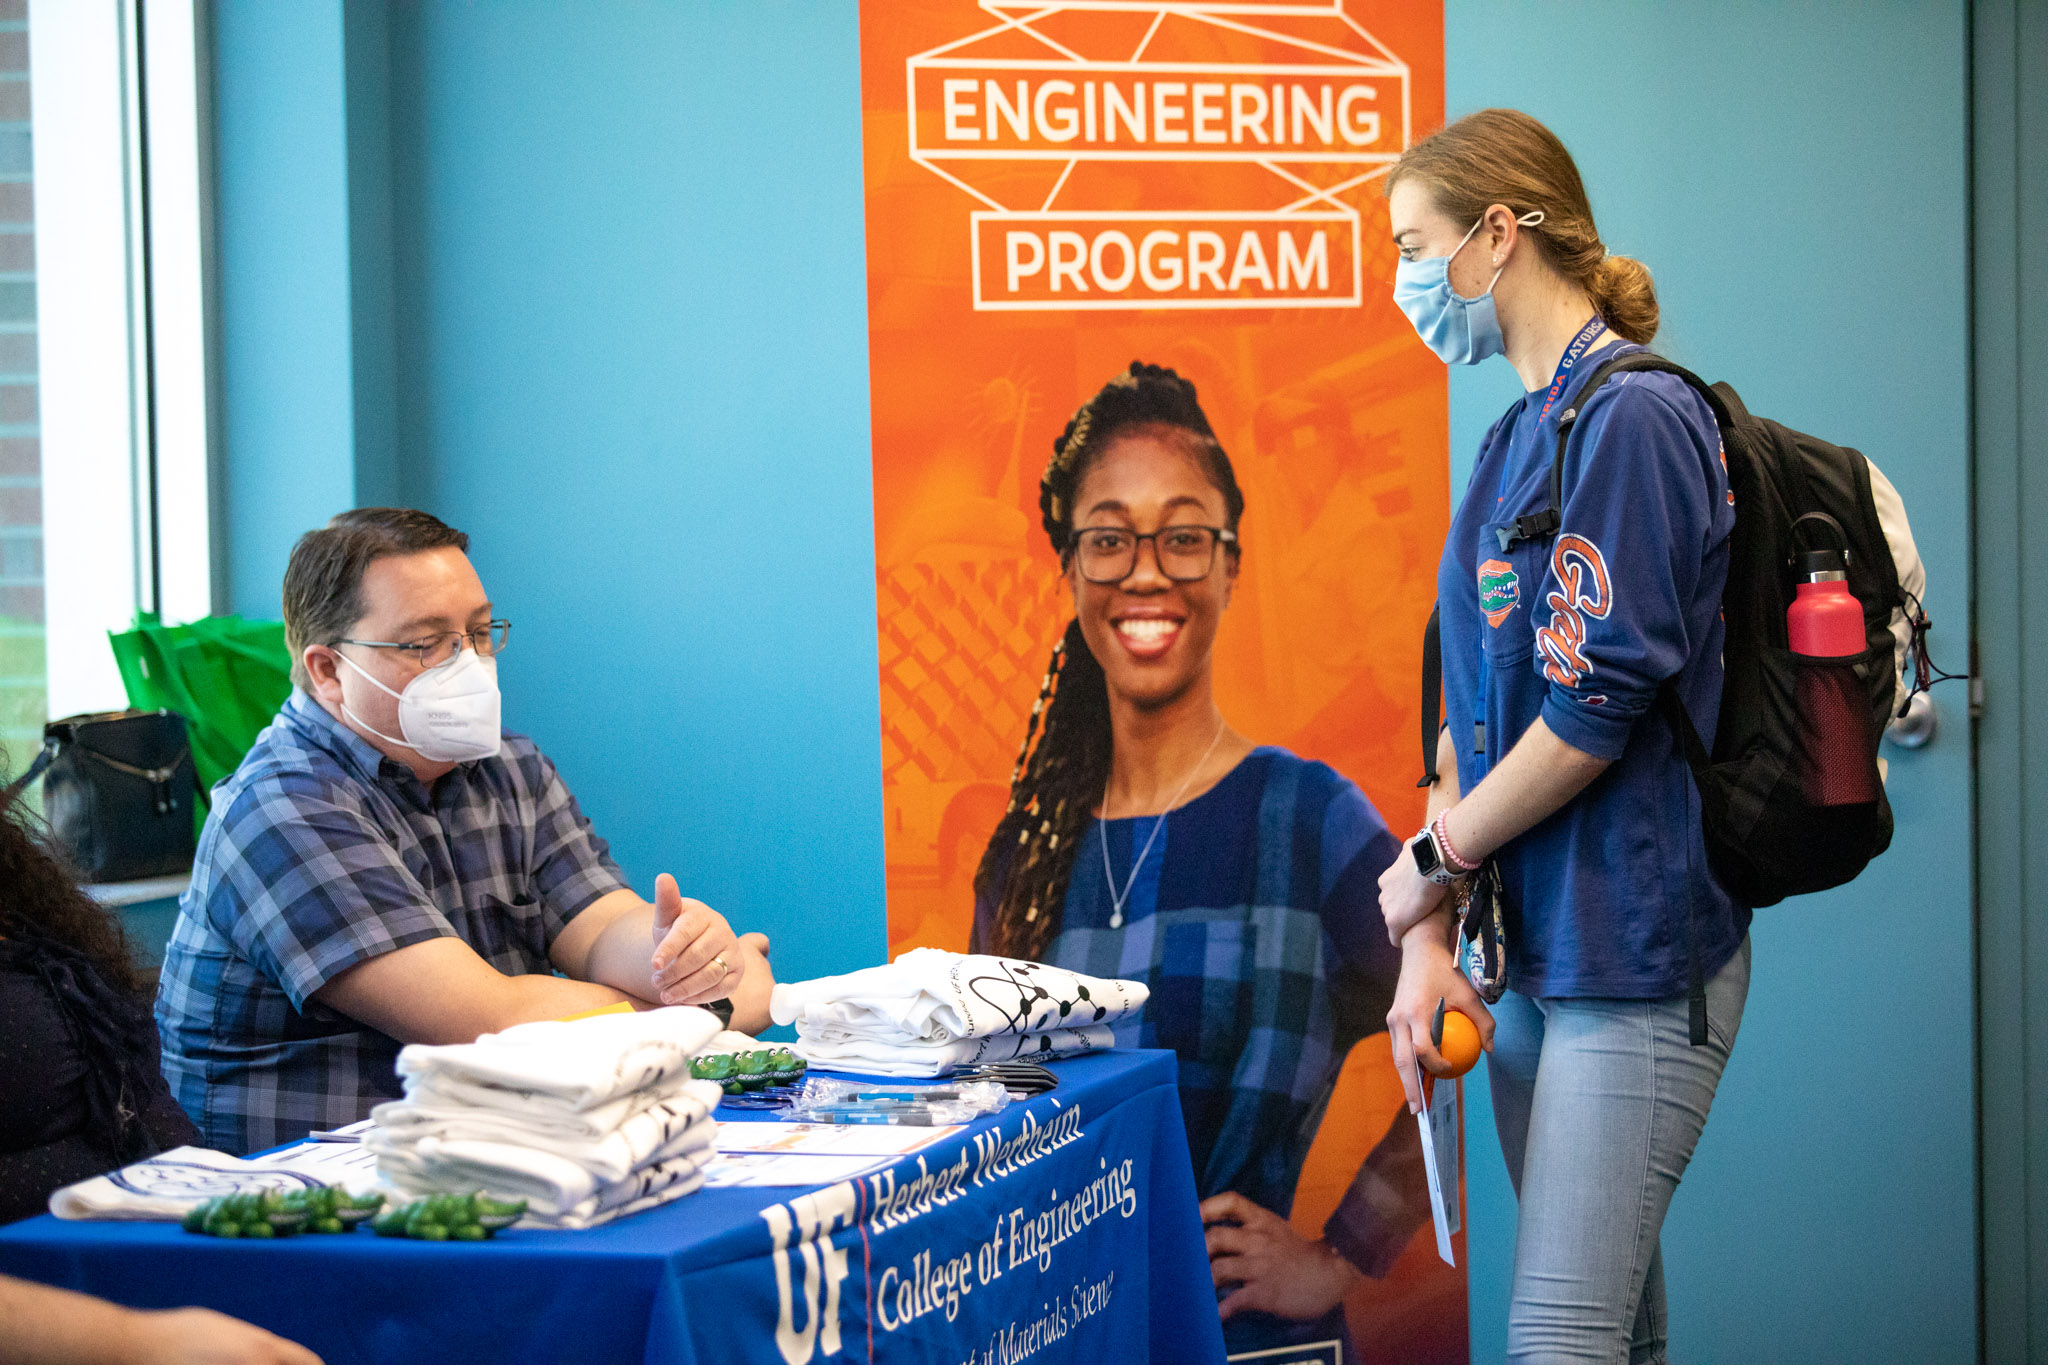 Career Showcase launches new experience for UF students